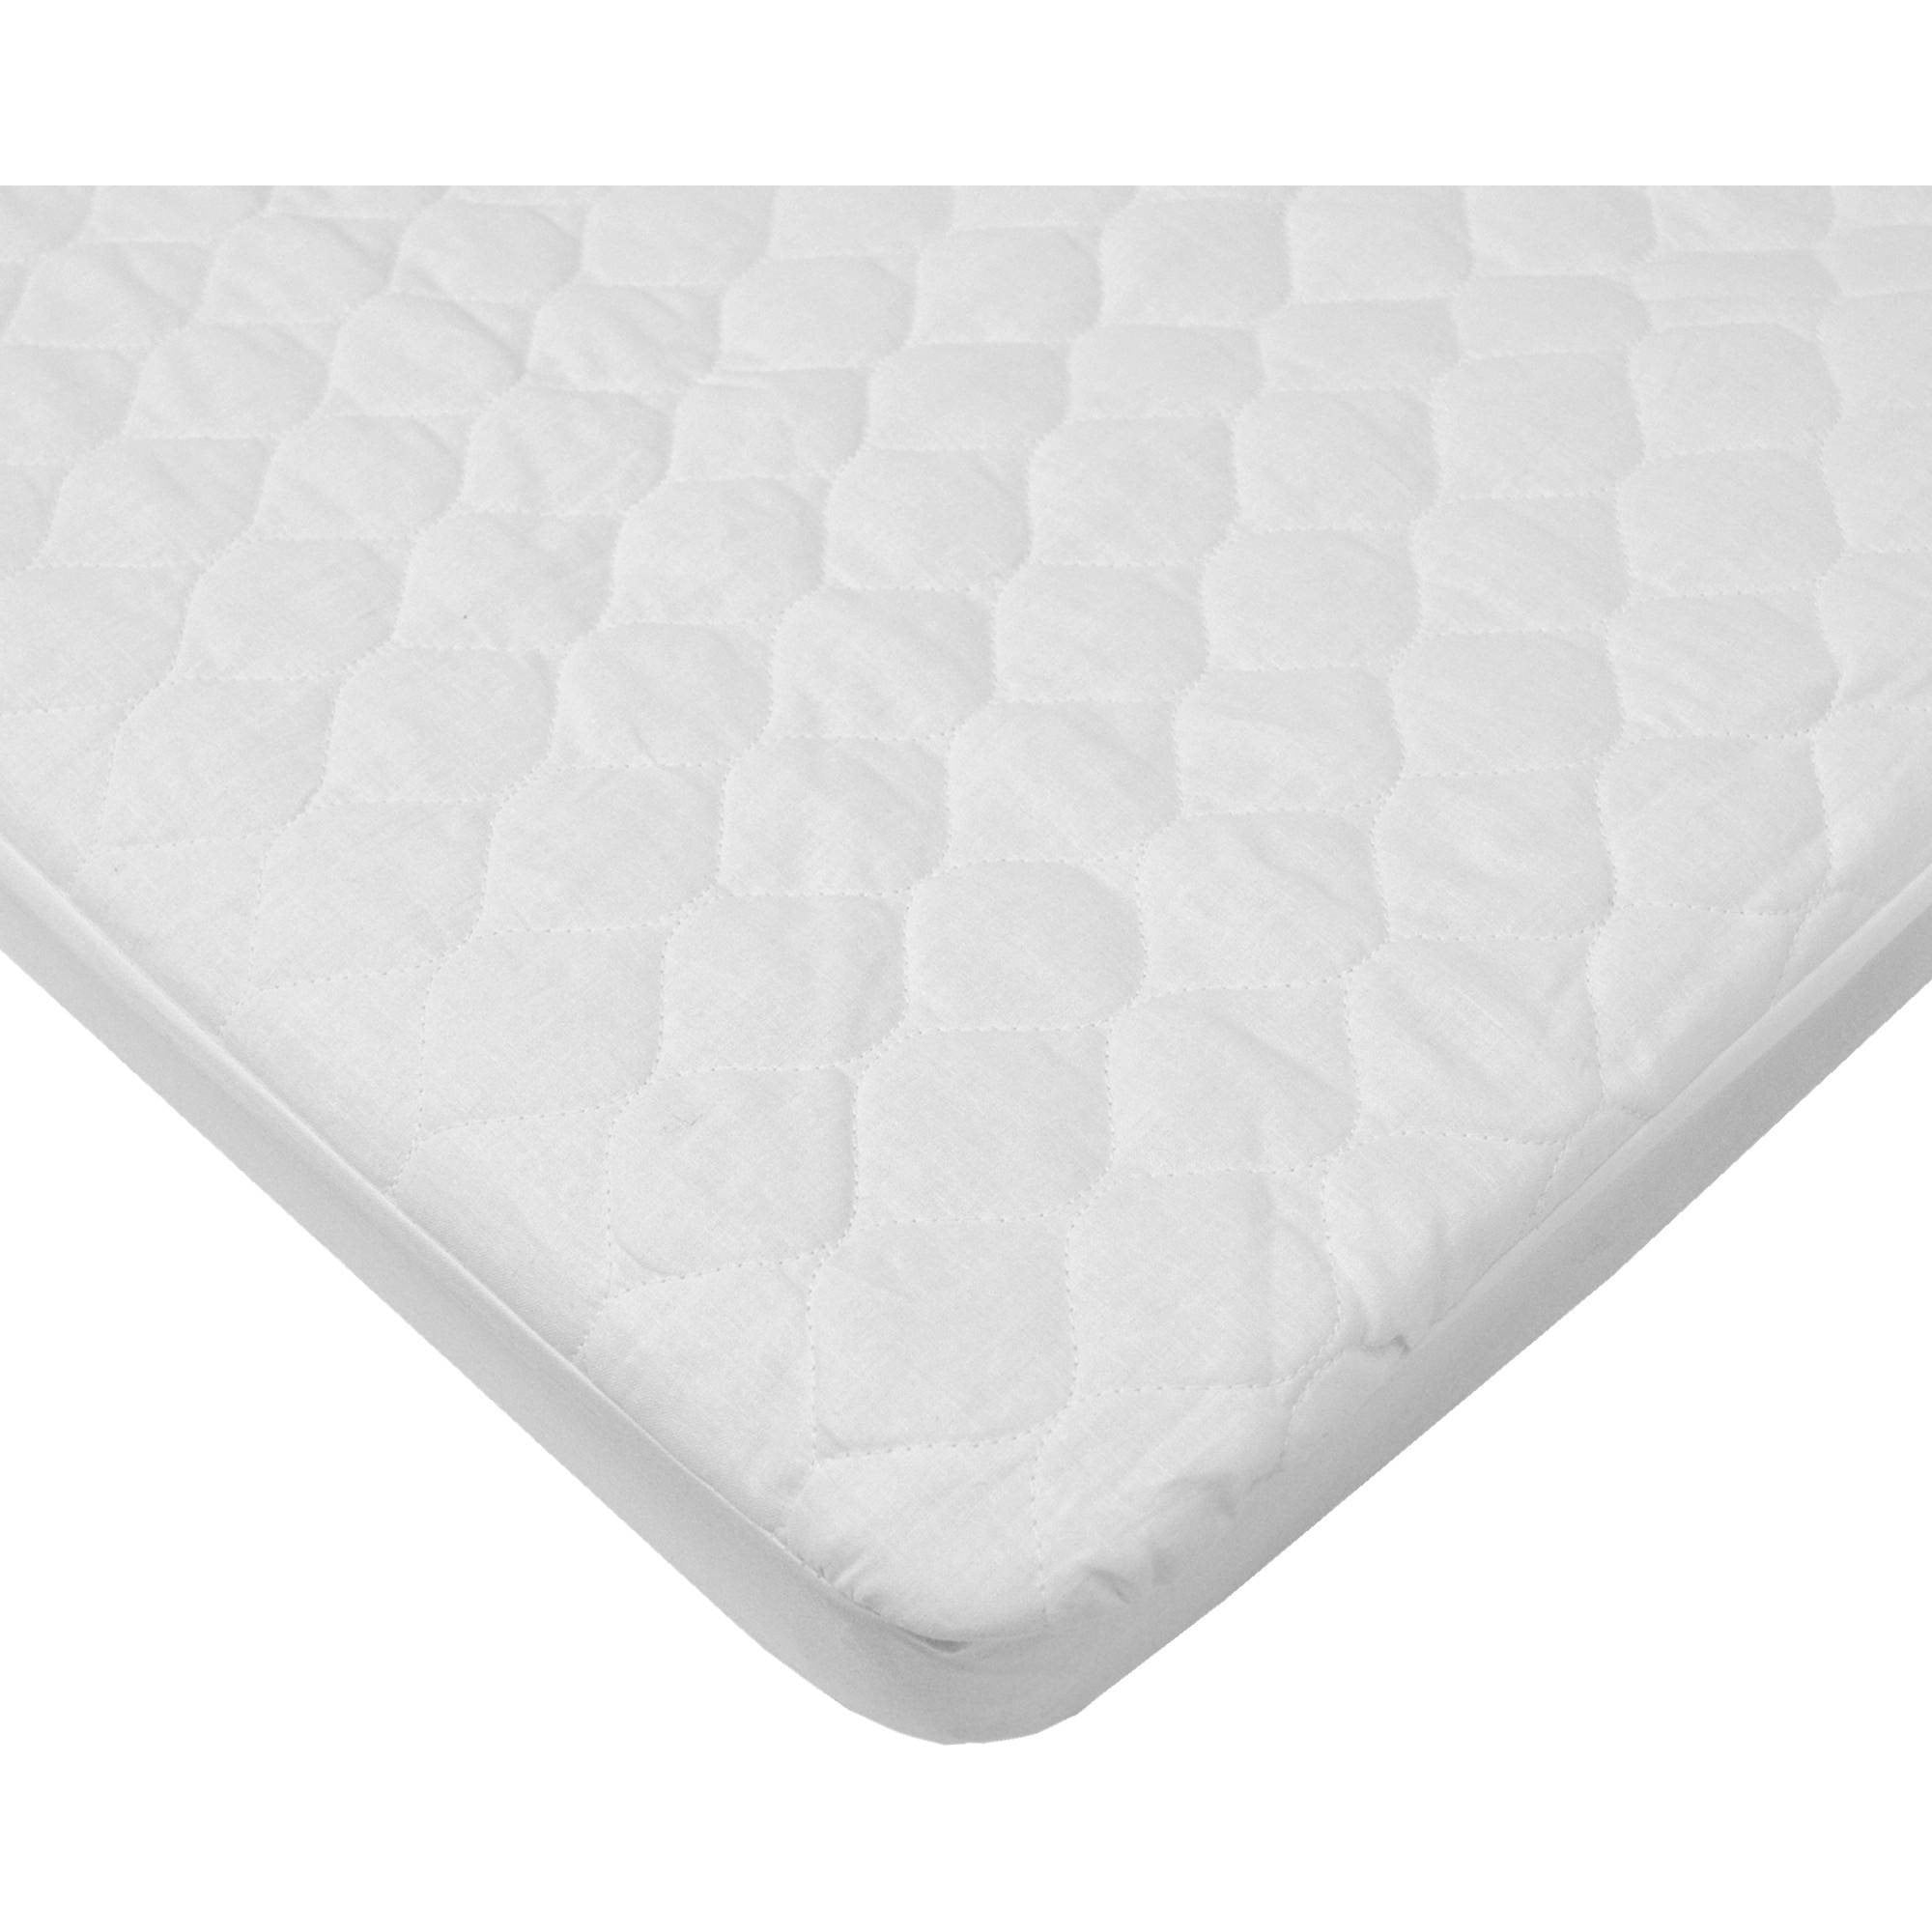 Breathable,Easy Care 100% Bamboo Crib Fitted Sheet Waterproof 100% Bamboo Fiber Baby Sheet 52x28 for Standard Crib and Toddler Mattresses Soft White, 2852 